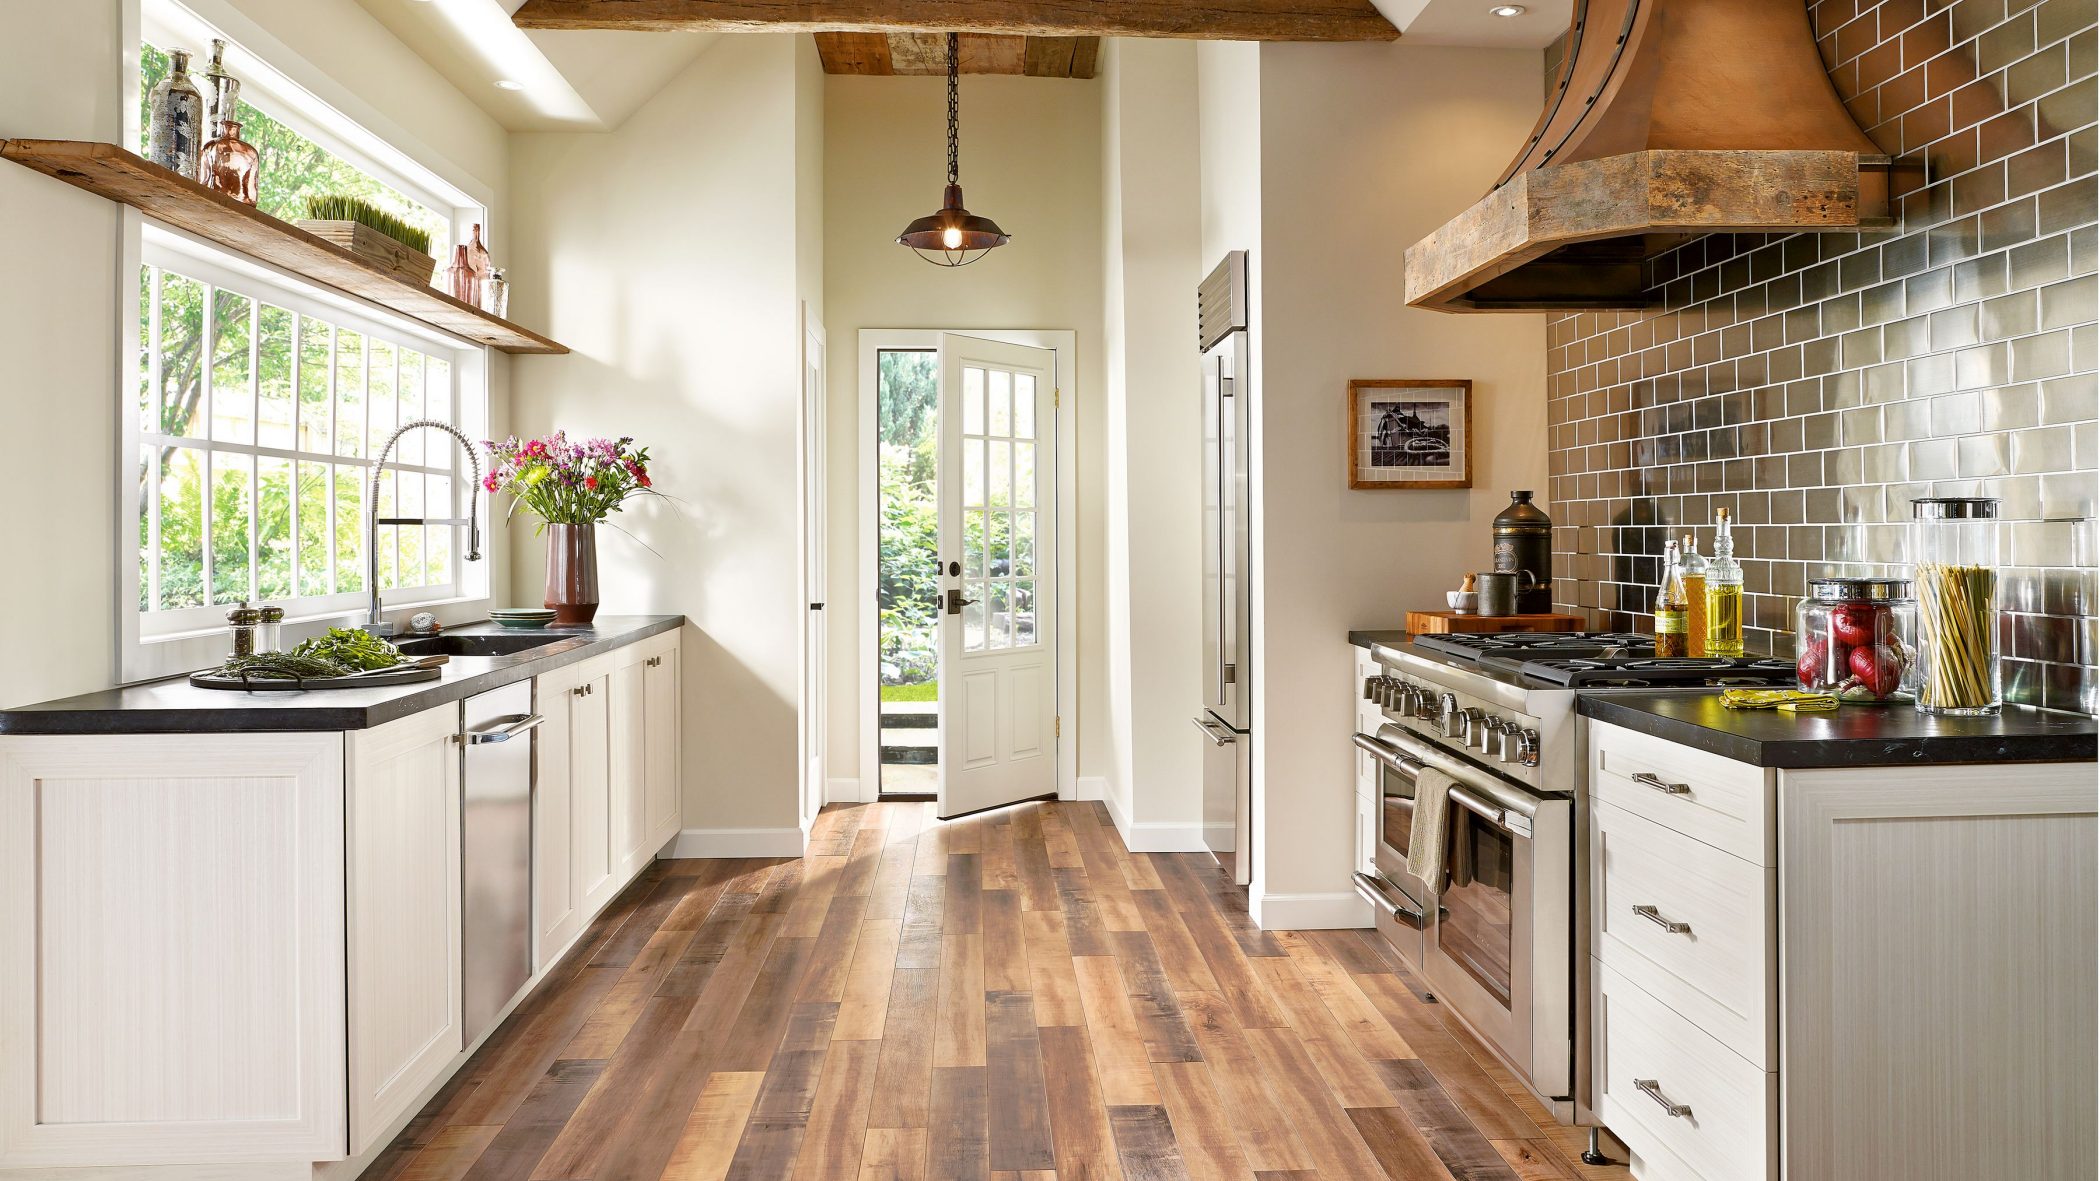 The Complete Guide To Choosing The Right Flooring For Your Kitchen